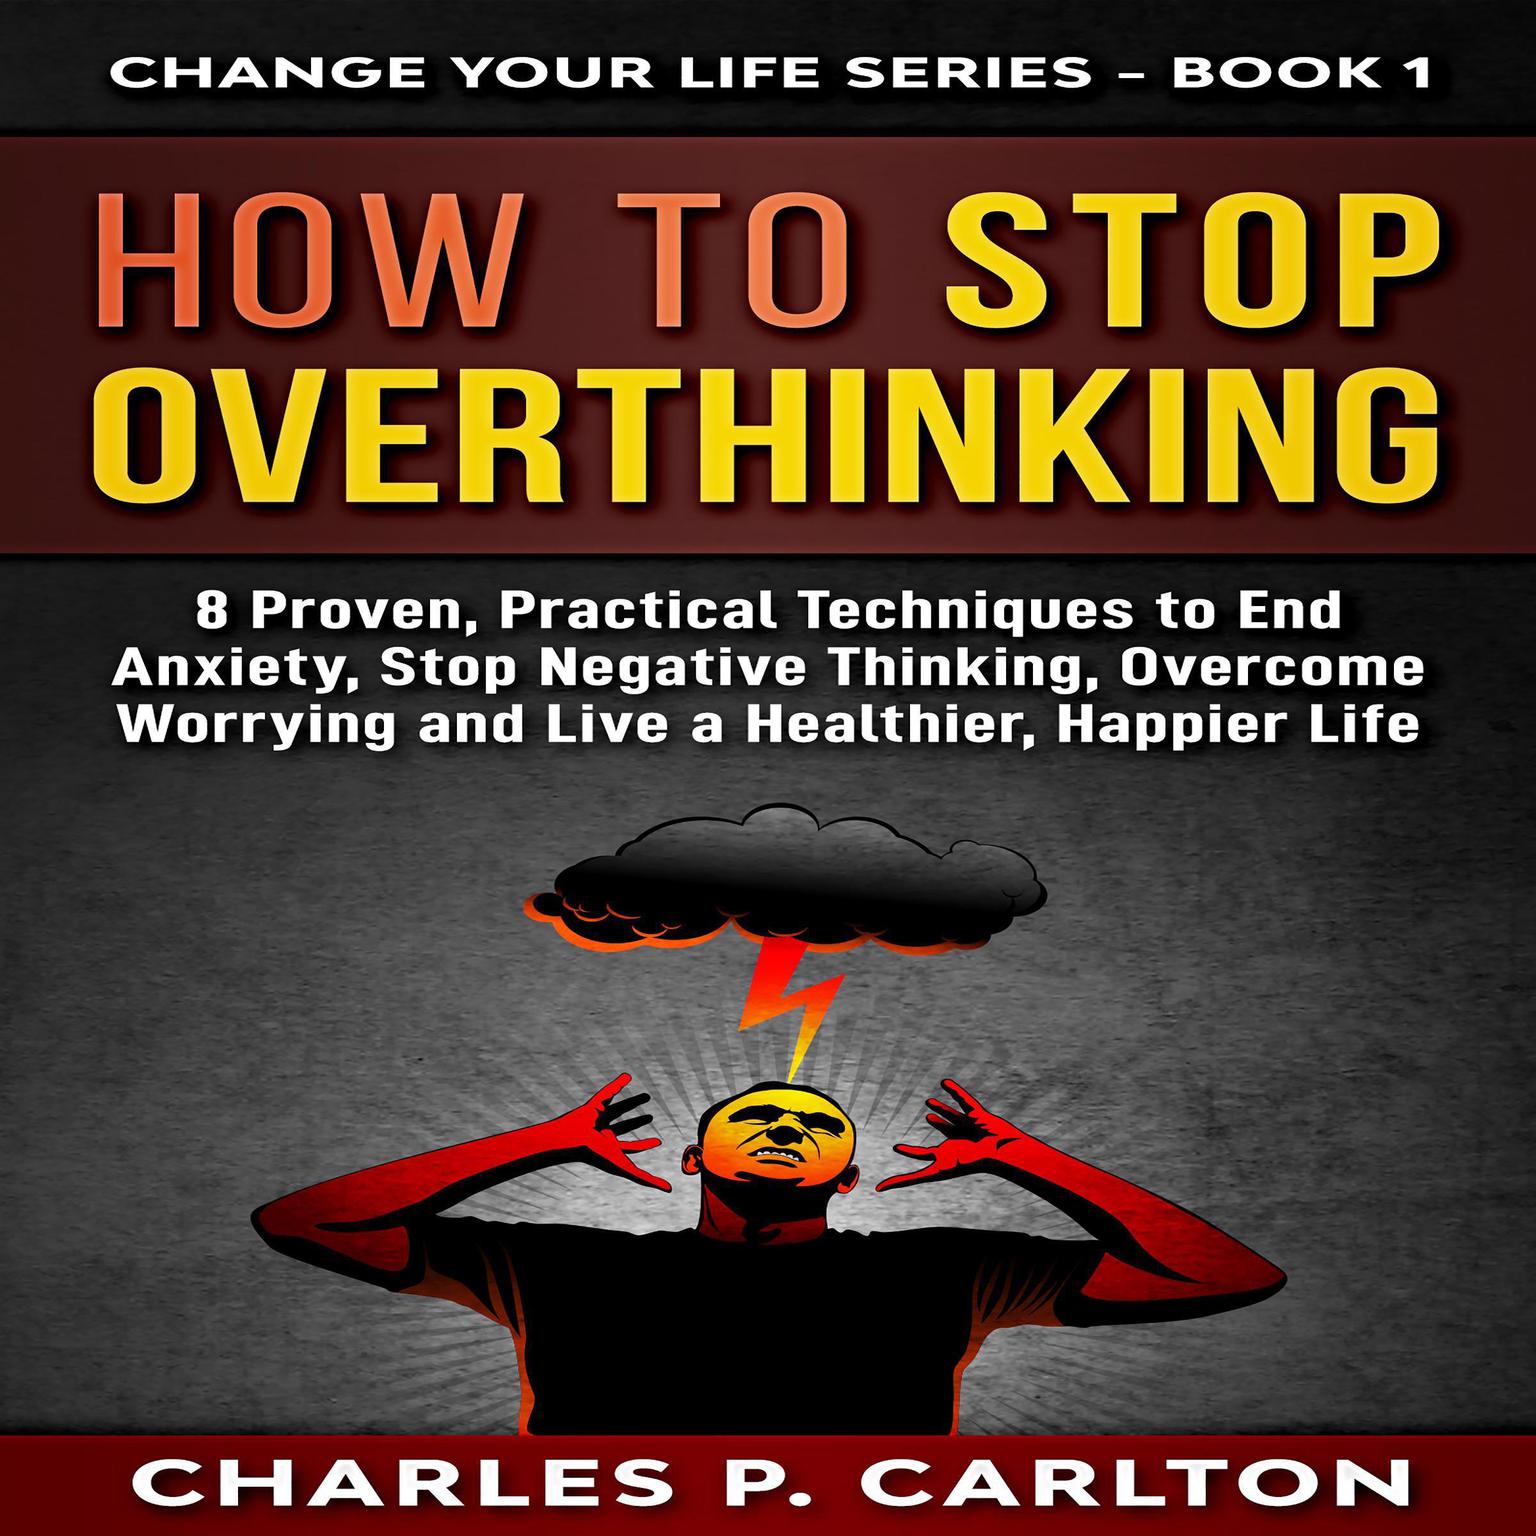 How to Stop Overthinking: 8 Proven, Practical Techniques to End Anxiety, Stop Negative Thinking, Overcome Worrying, and Live a Healthier, Happier Life. : 8 Proven, Practical Techniques to End Anxiety, Stop Negative Thinking, Overcome Worrying, and Live a Healthier, Happier Life Audiobook, by Charles P. Carlton